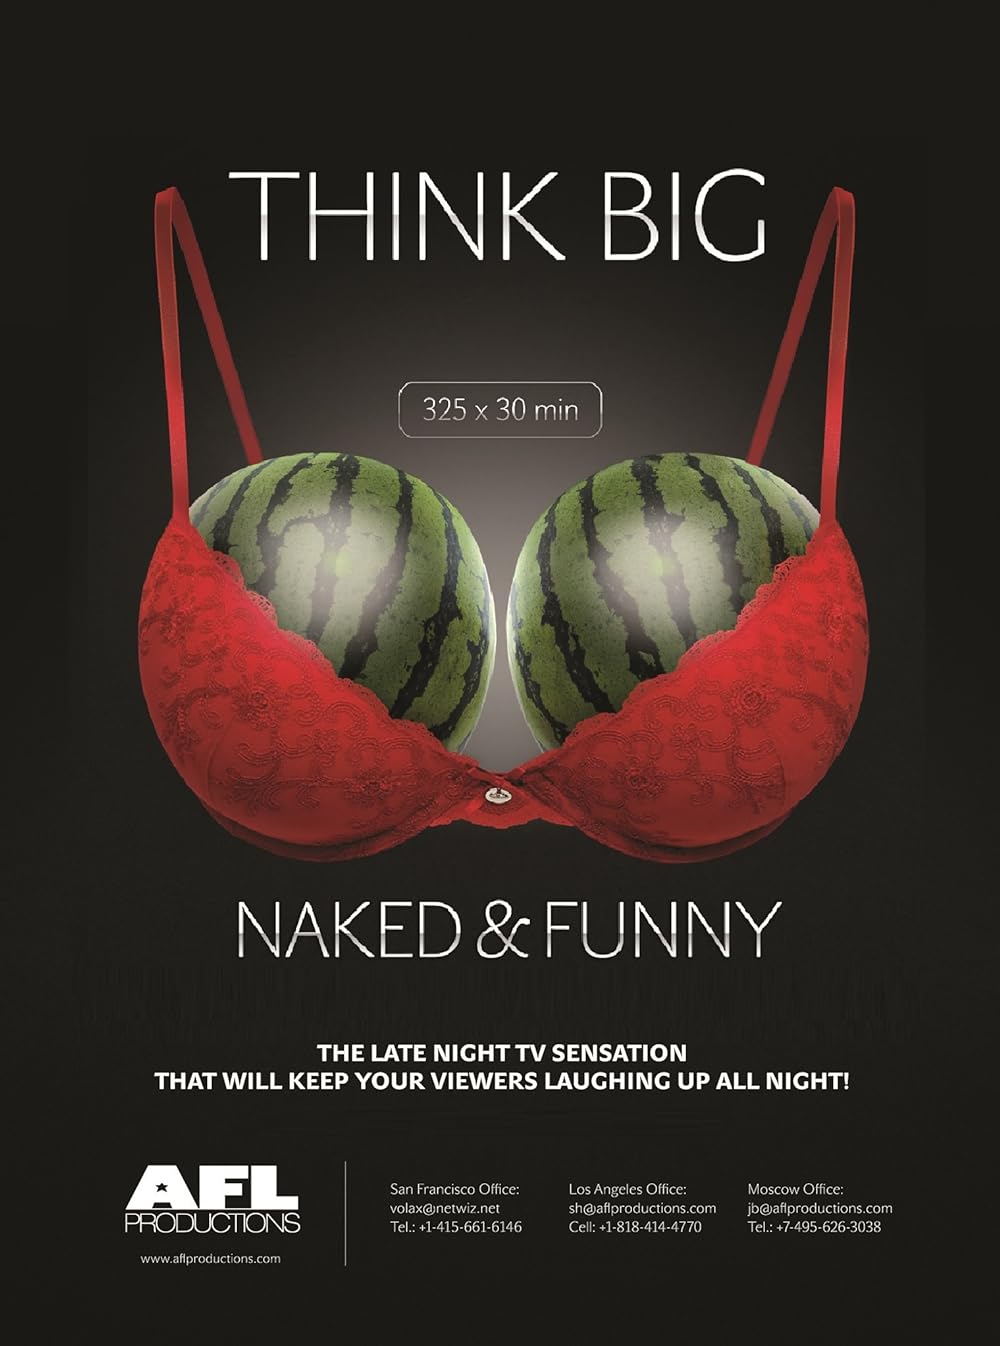 andrew panella recommends naked and funny pic